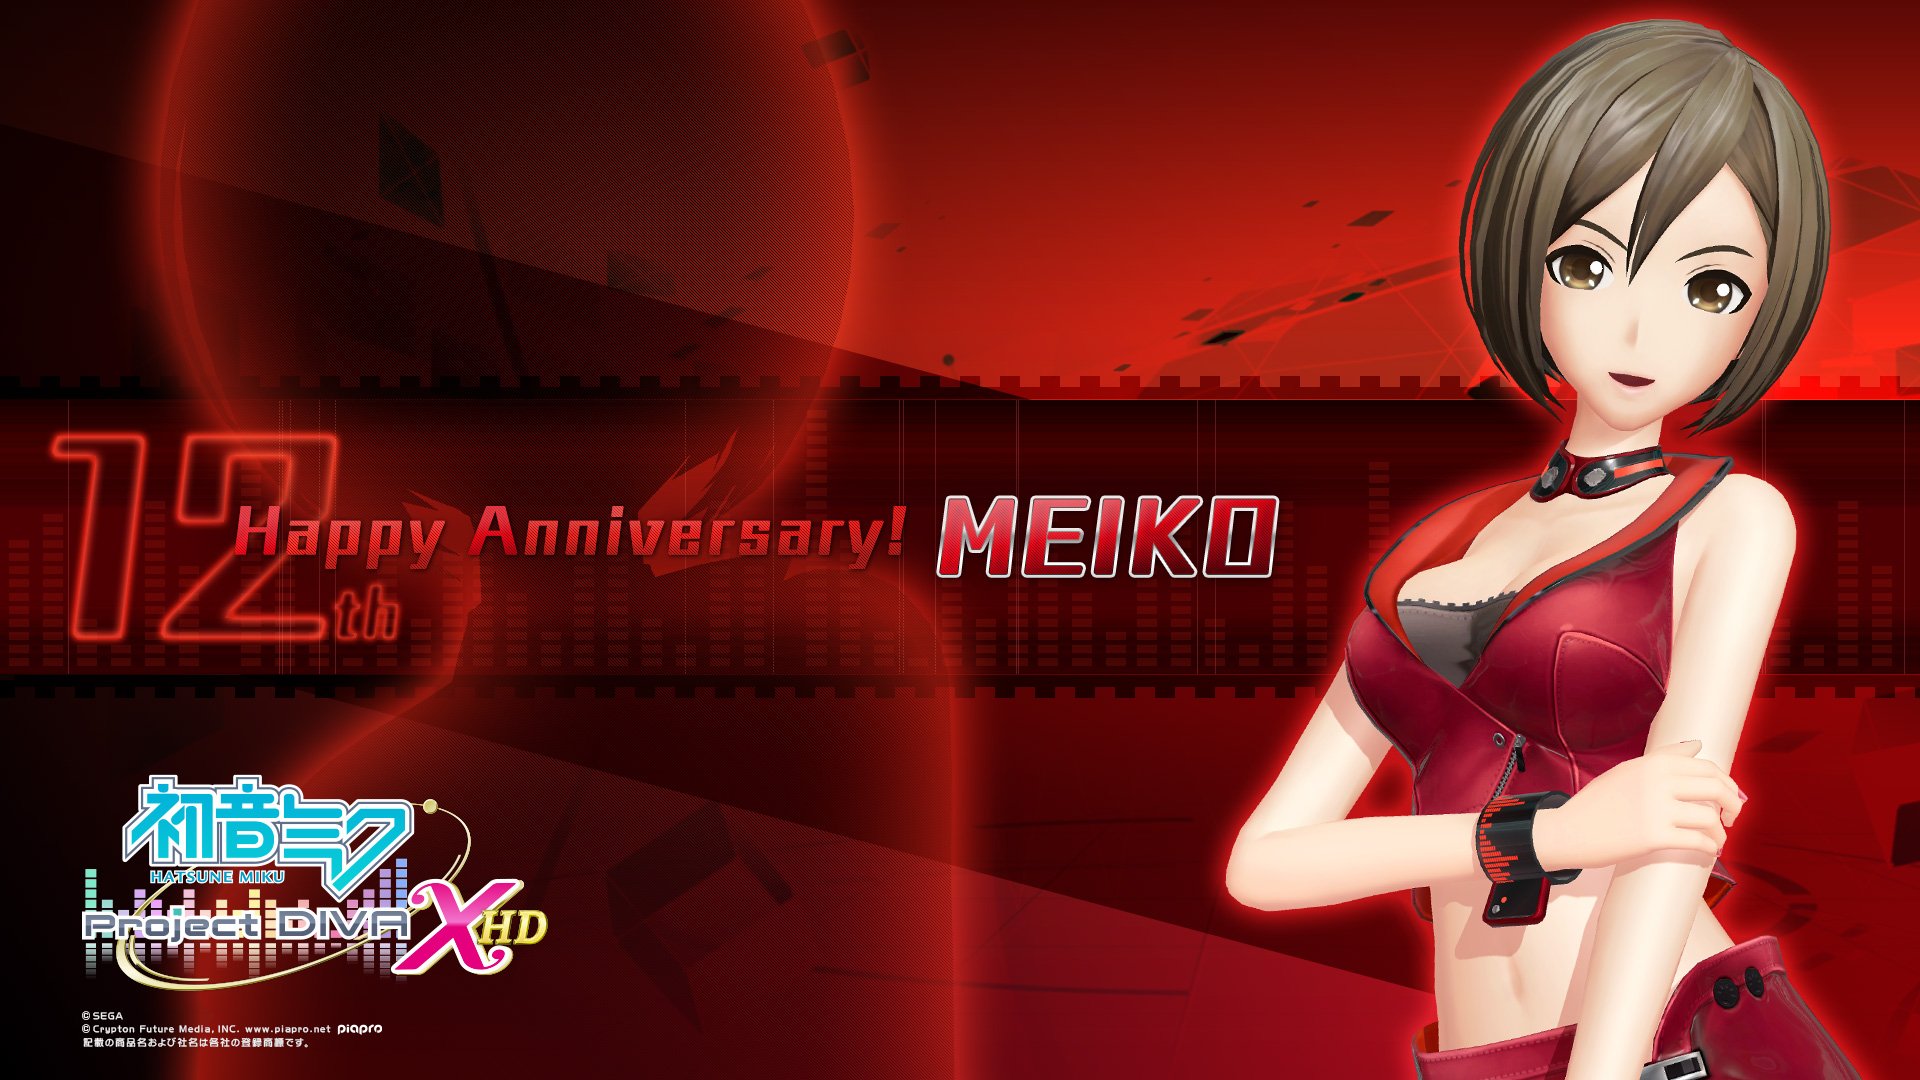 Meiko Hd Wallpaper Background Image 1920x1080 Id 932506 Images, Photos, Reviews